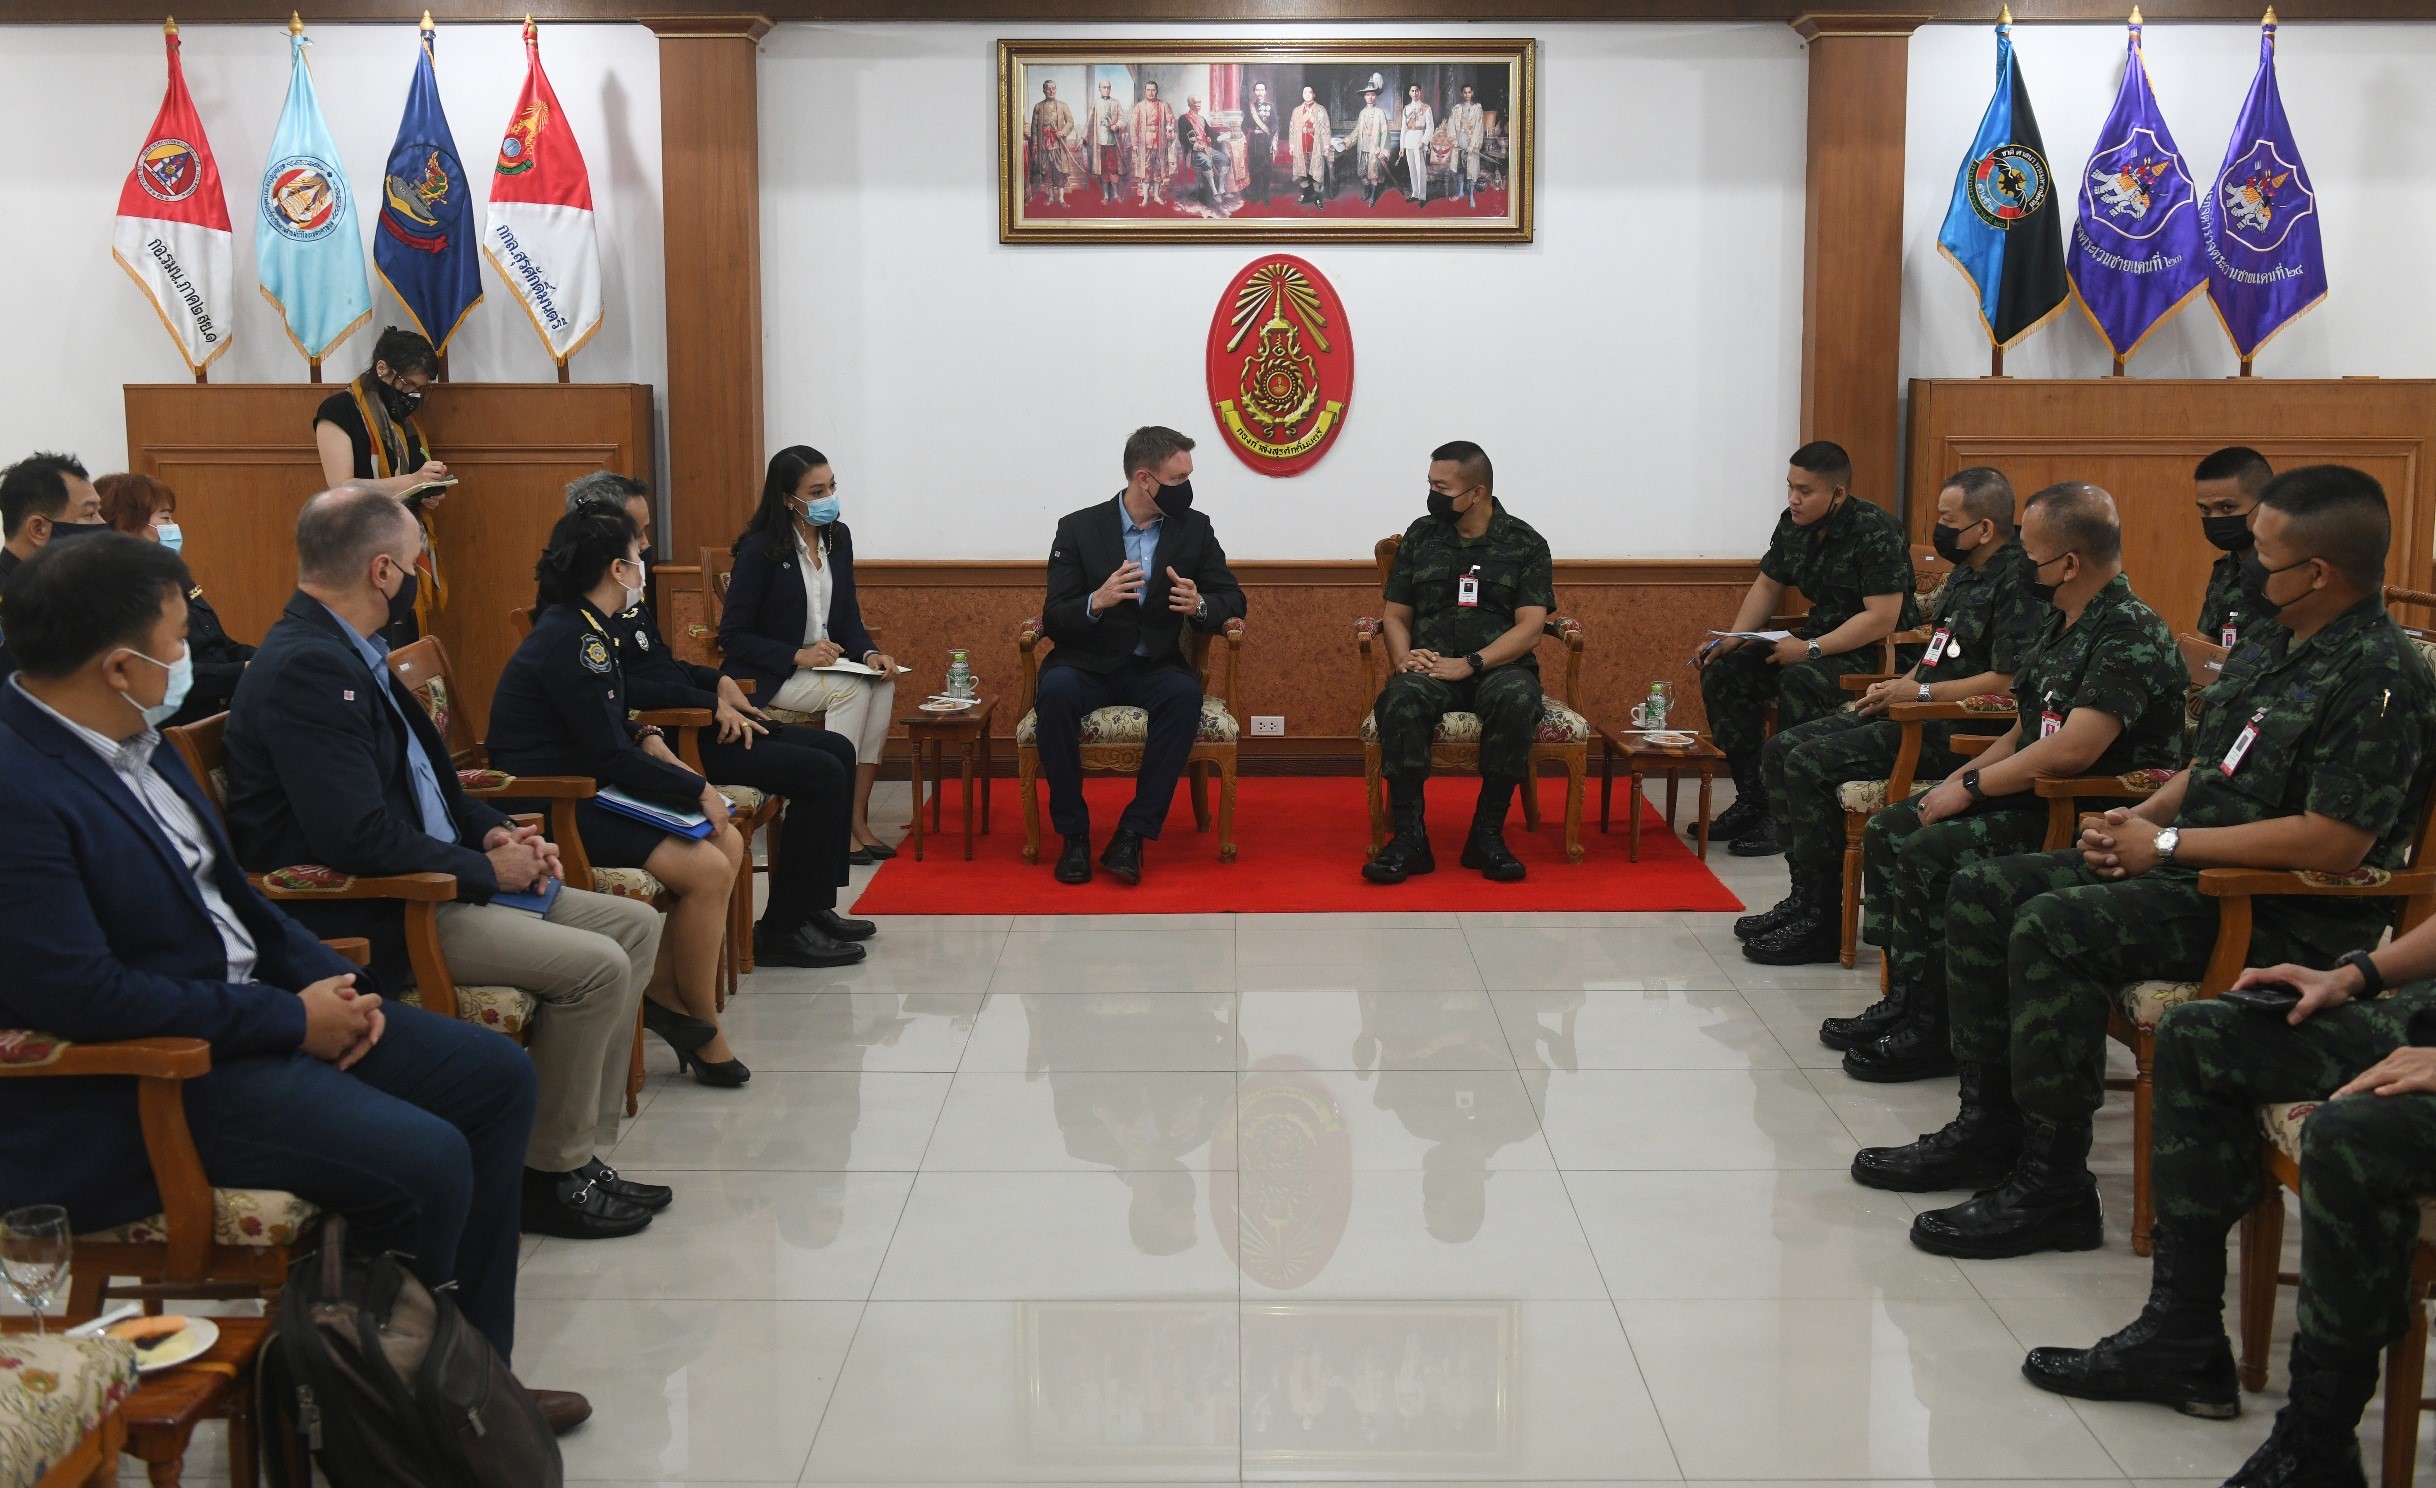 <p>Regional Representative Jeremy Douglas and Surasakmontri Task Force Commander Major General Boonsin Padklang discuss the situation on the border with Laos and the significant increase in trafficking the last year</p>